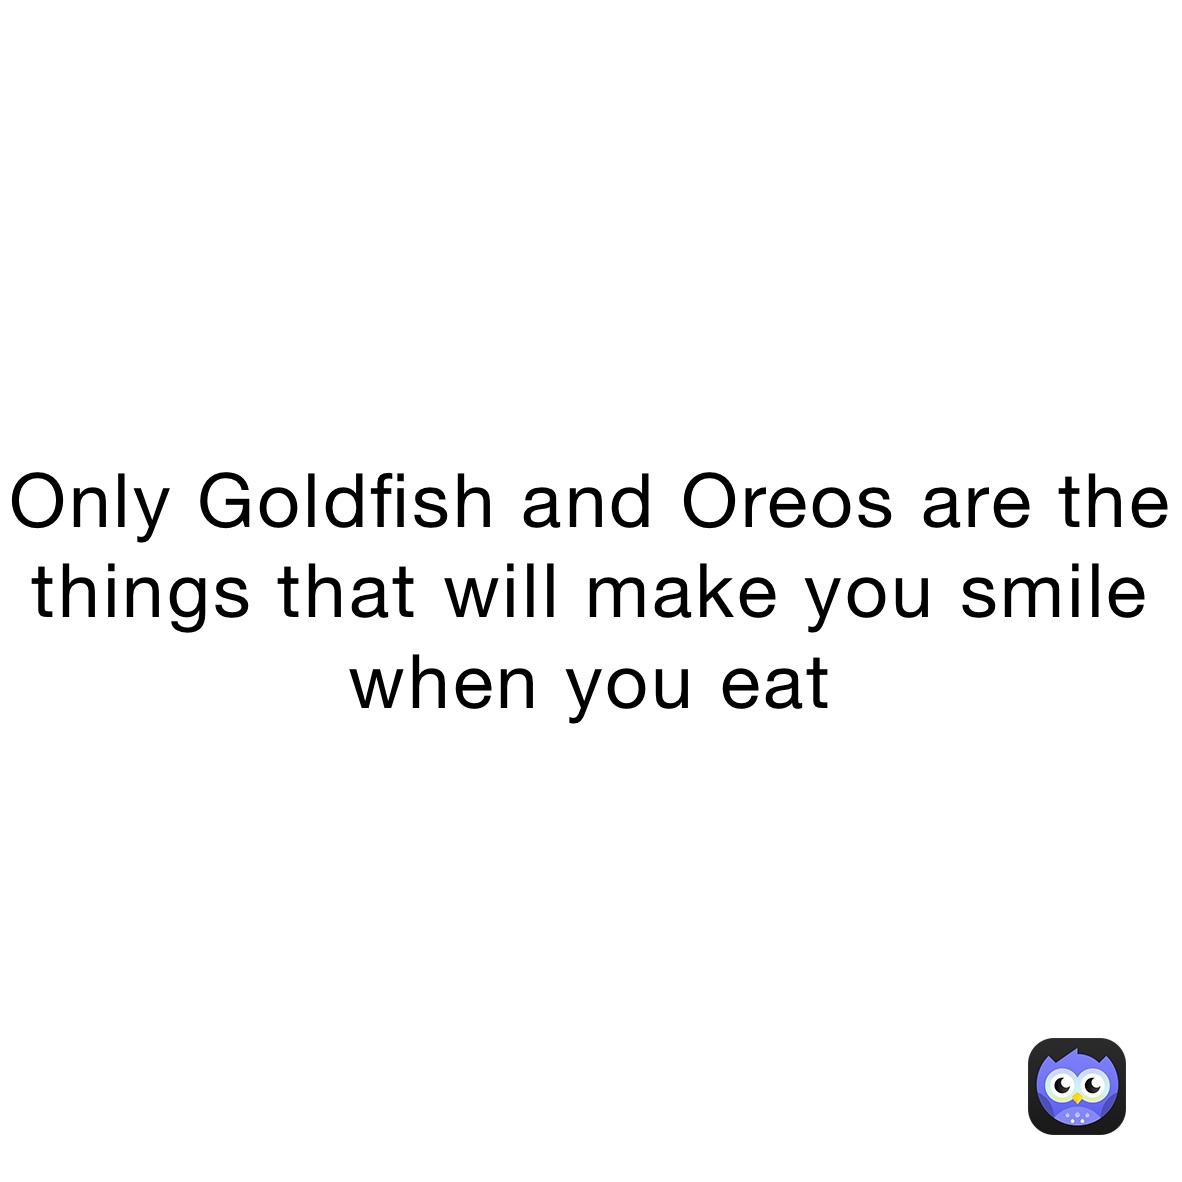 Only Goldfish and Oreos are the things that will make you smile when you eat